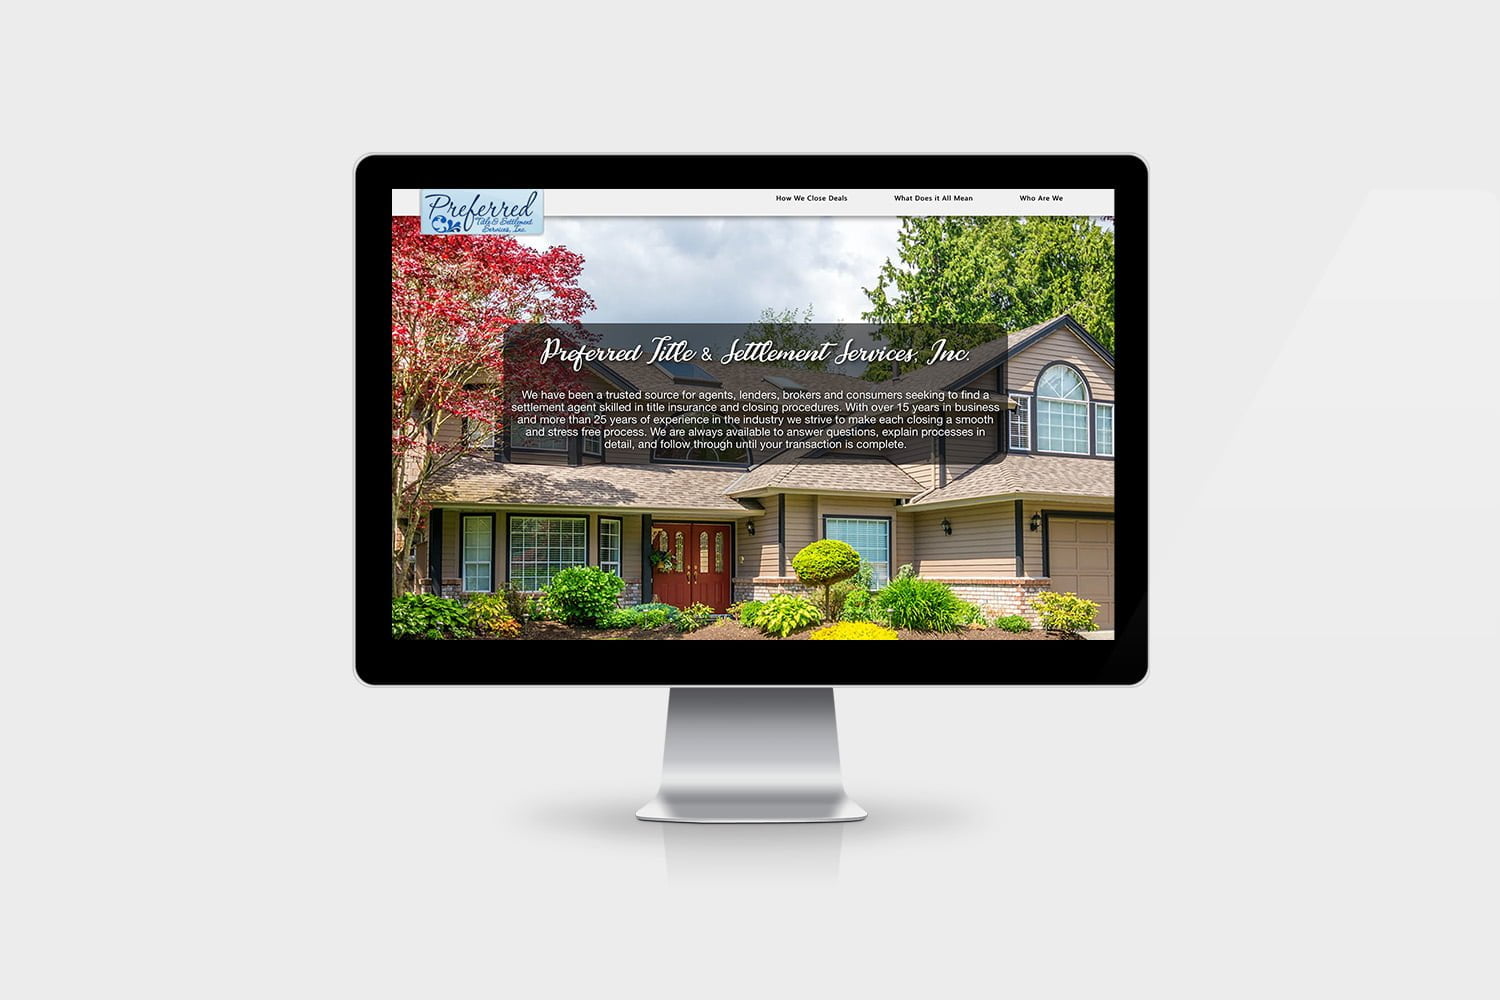 Website design for title companies and realtors.